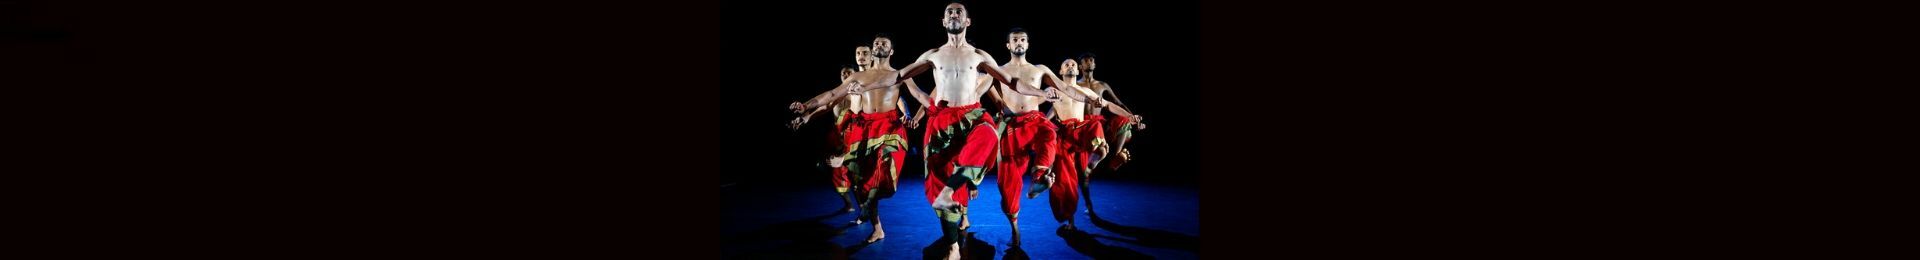 Akram Khan Company – We are but Shadows banner image